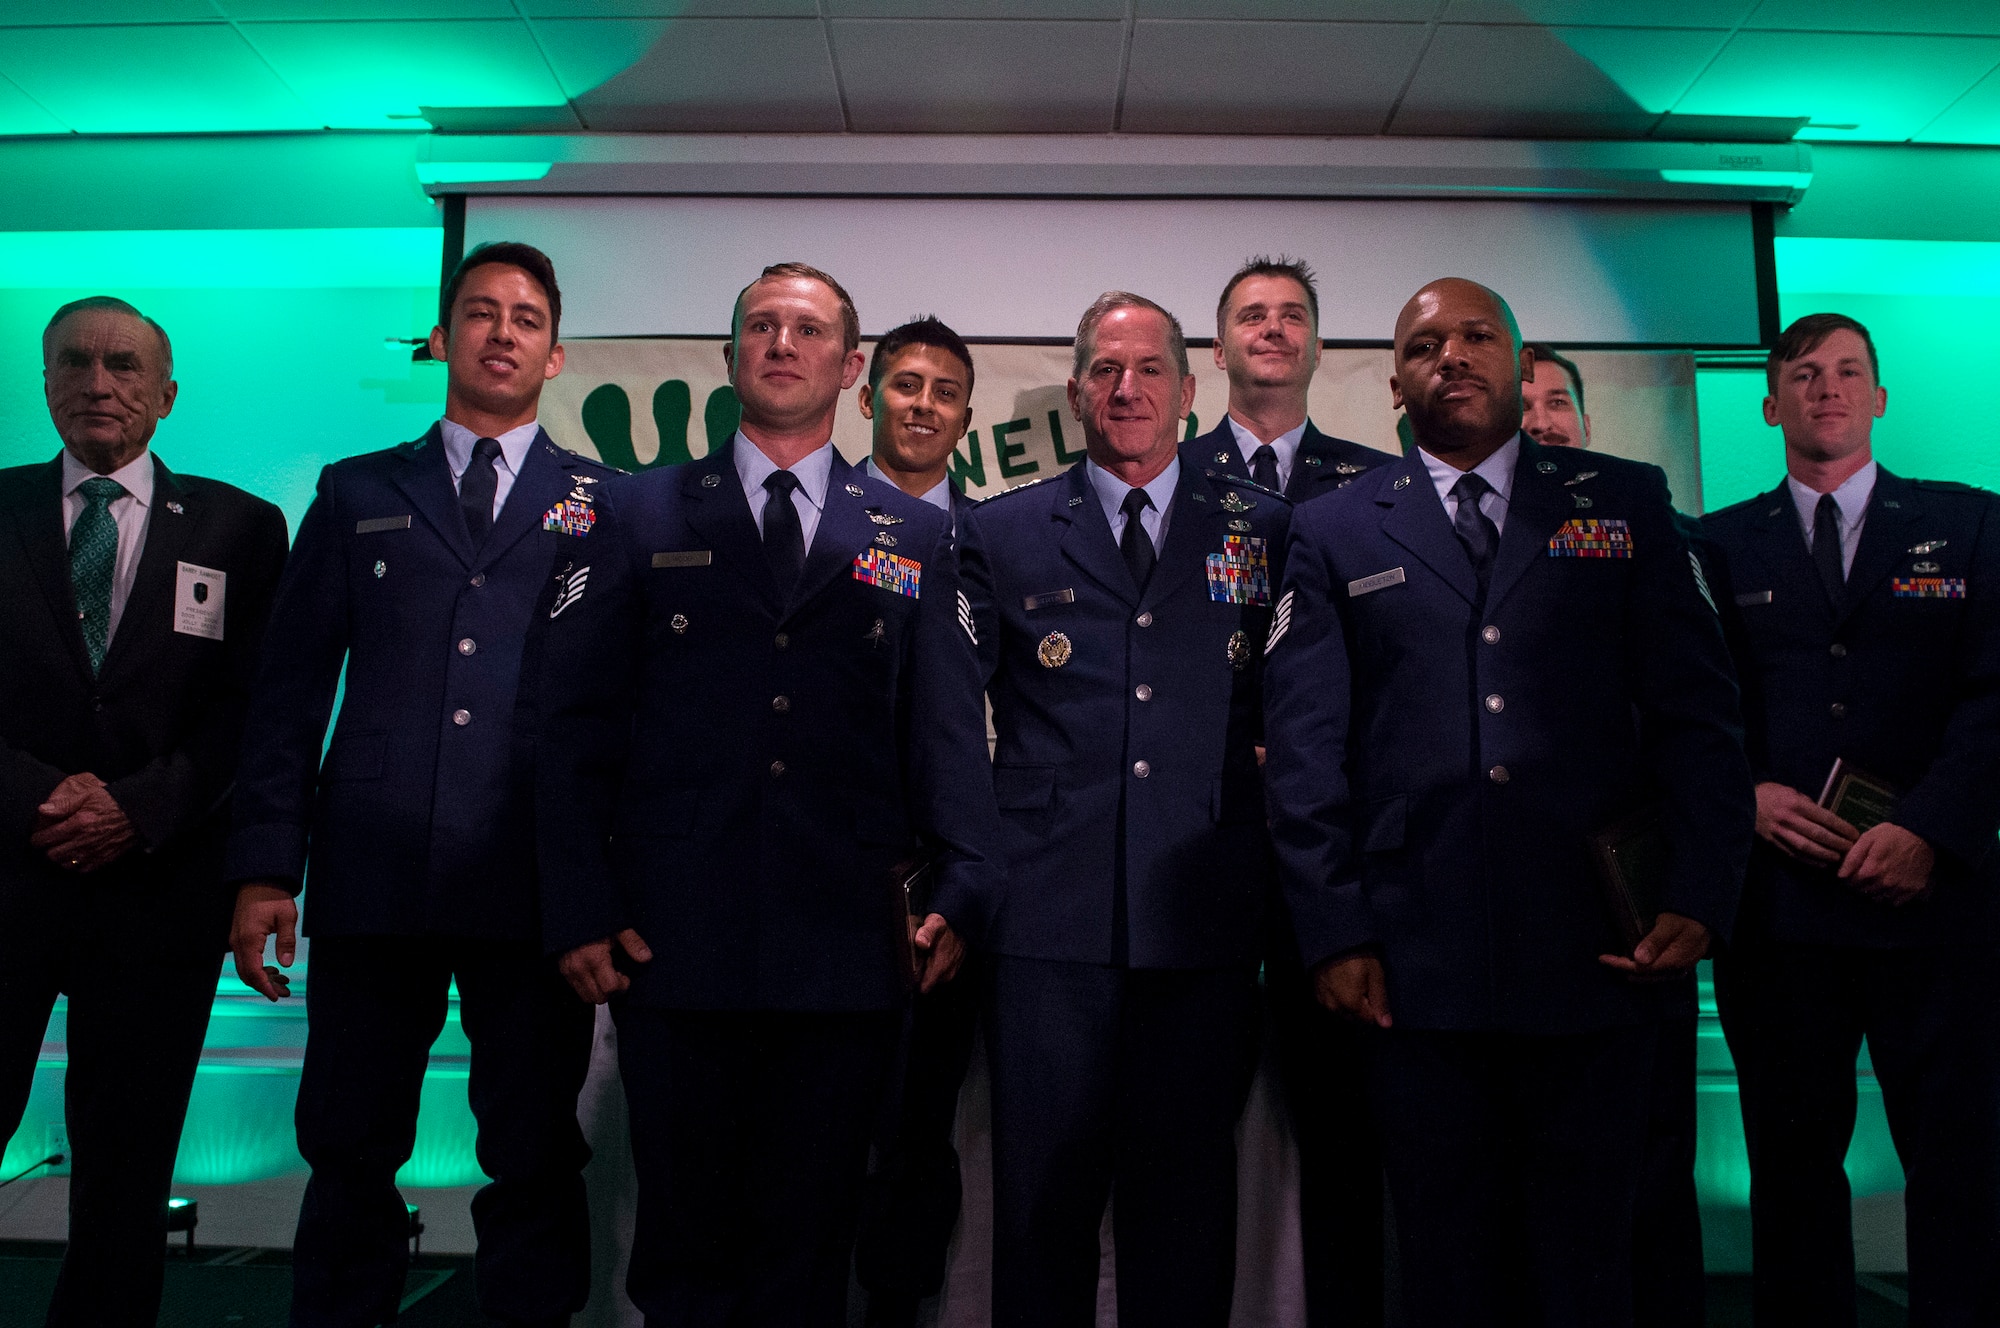 Airmen from the 41st and 48th Rescue Squadron’s (RQS) pose for a photo with Air Force Chief of Staff Gen. David L. Goldfein, during the banquet celebrating the 50th reunion of the Jolly Green Association (JGA), May 4, 2019, in Fort Walton Beach, Fla. The JGA presented Airmen from the 48th and 41st RQS with the Rescue Mission of the Year award; the only non Air Force award recognized by the Air Force. (U.S. Air Force Photo by Staff Sgt. Janiqua P. Robinson)